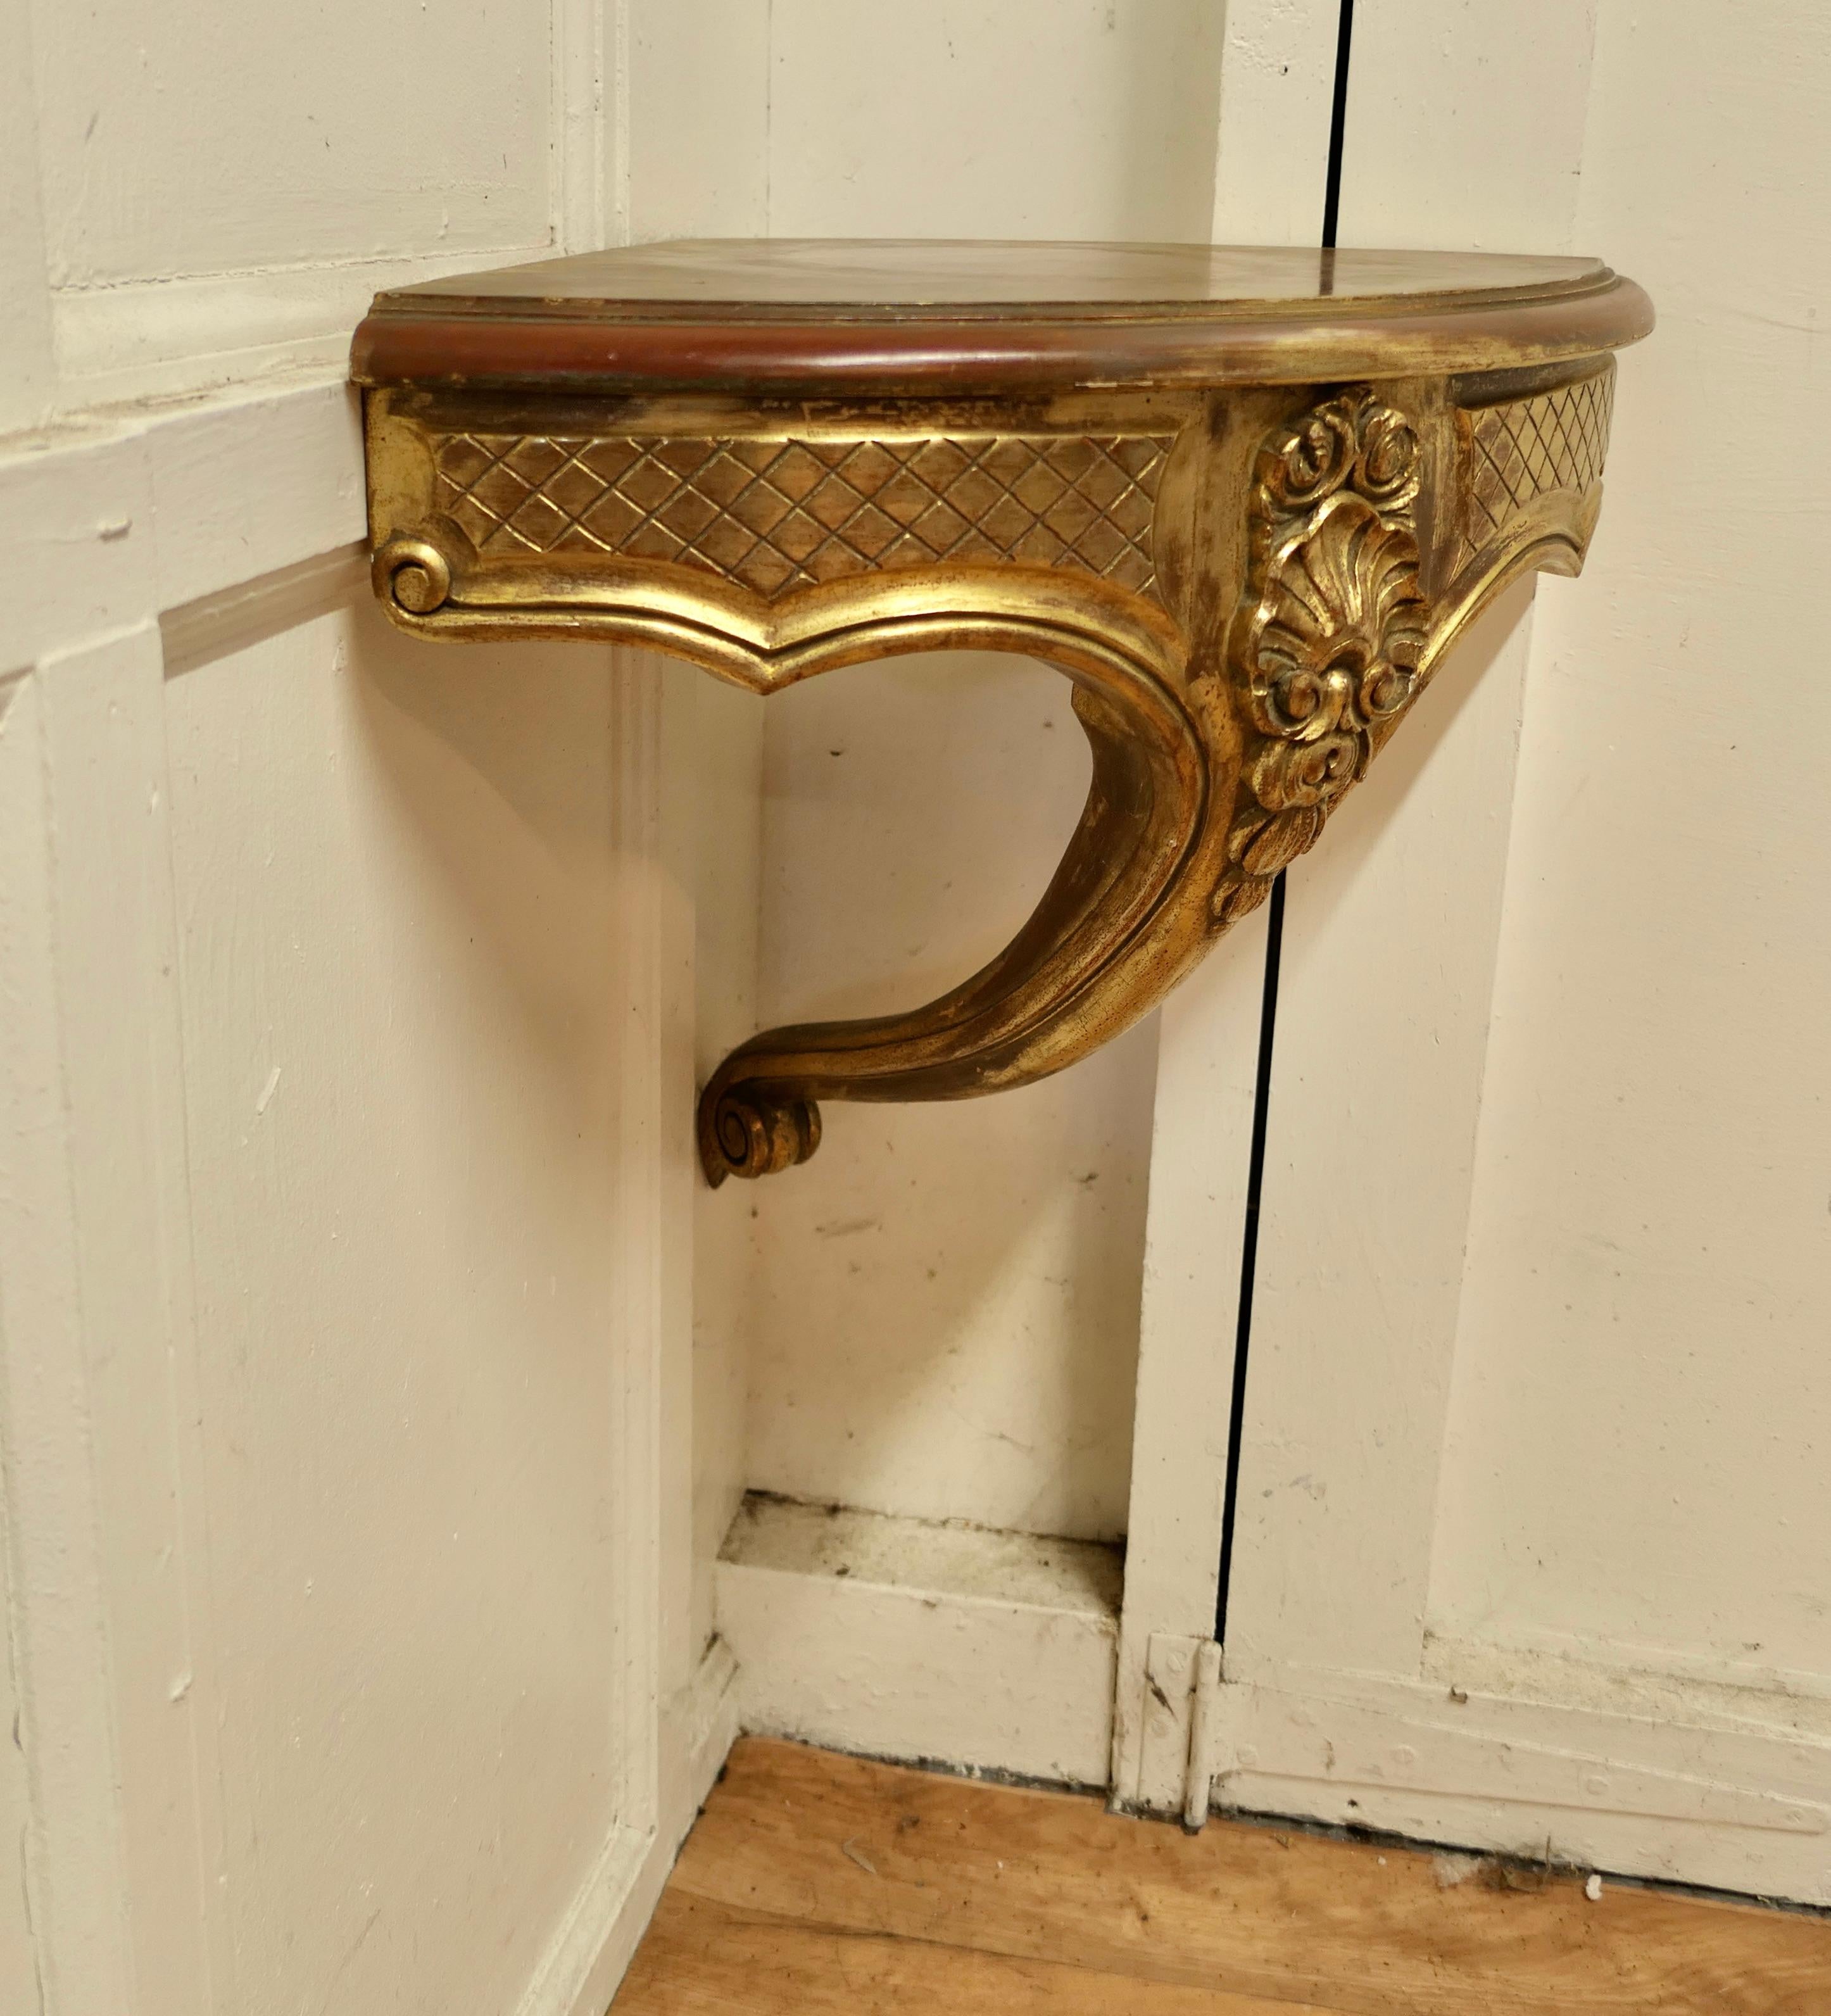 French Carved Gilt Corner Console wall shelf

A beautifully carved gilt console shelf, it has a bow shaped front and a carved leg
This is a good-looking piece and the Gold has a good bright colour, worn a bit with some of the red oxide